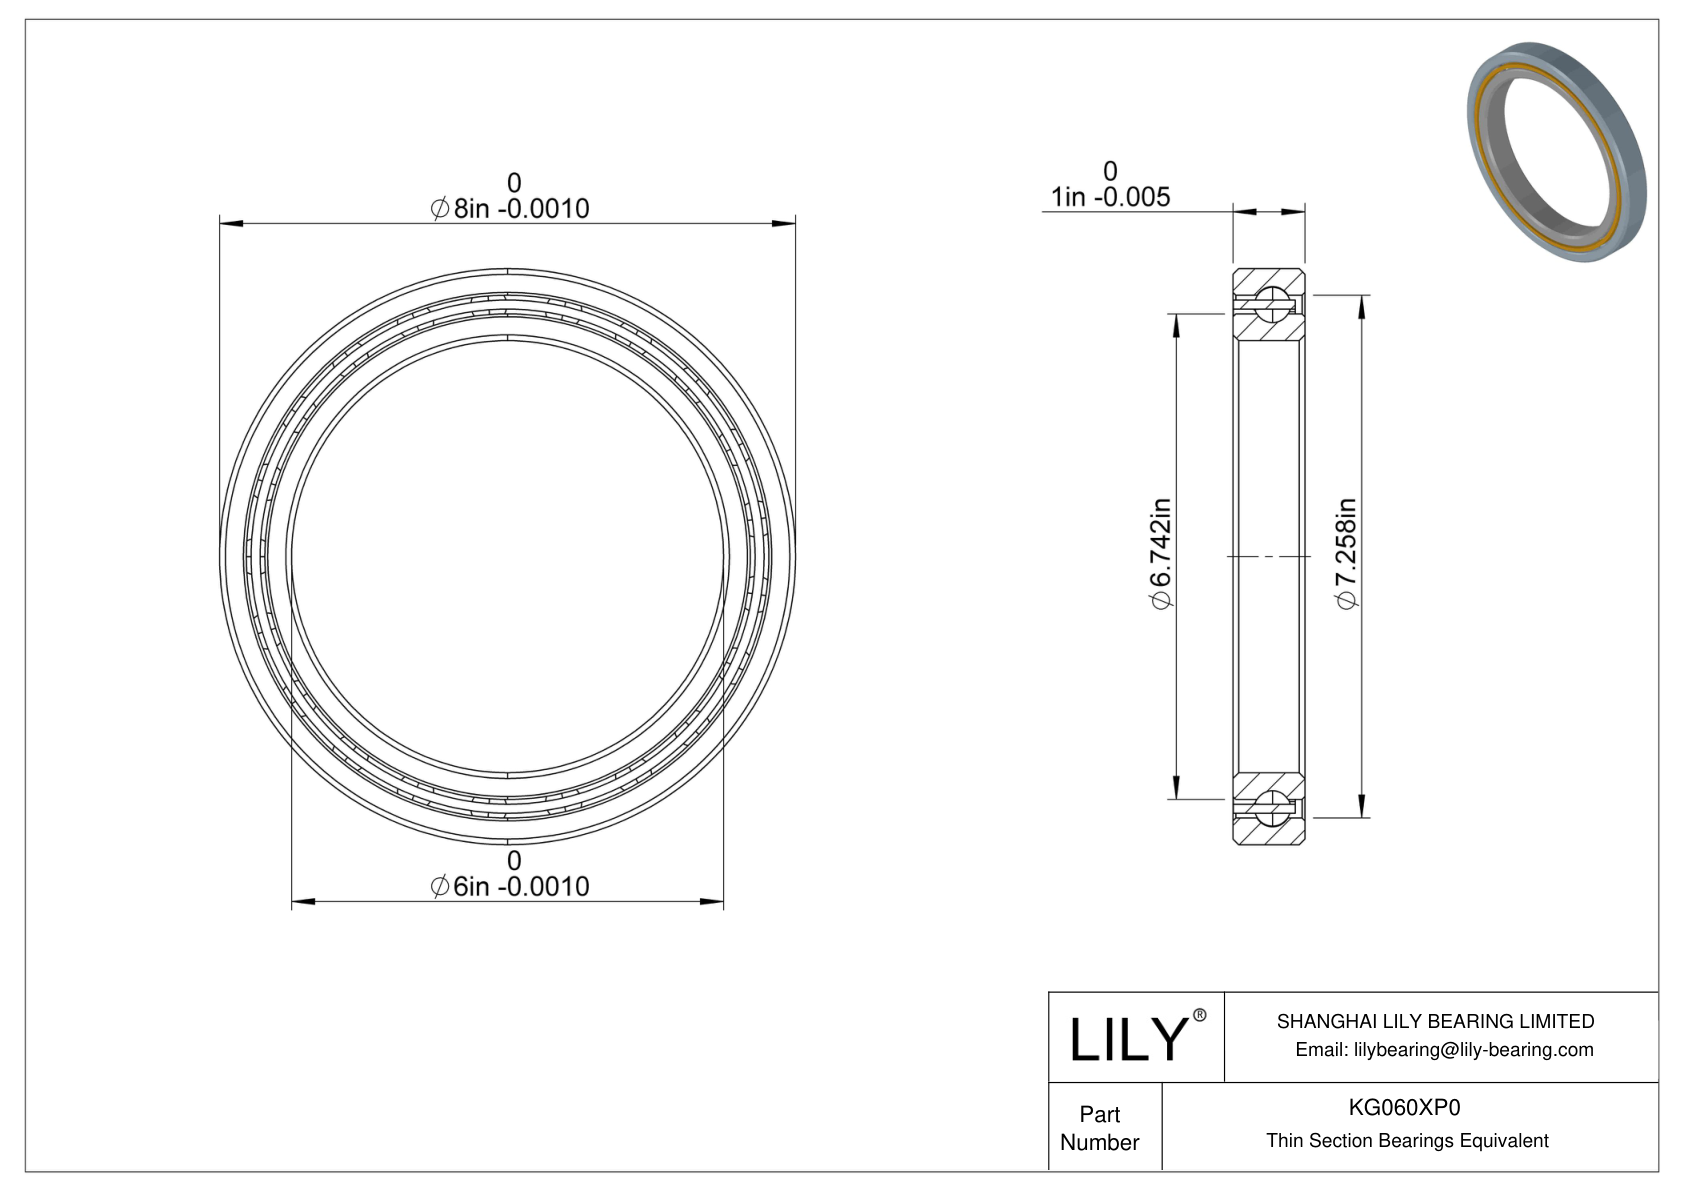 KG060XP0 Constant Section (CS) Bearings cad drawing